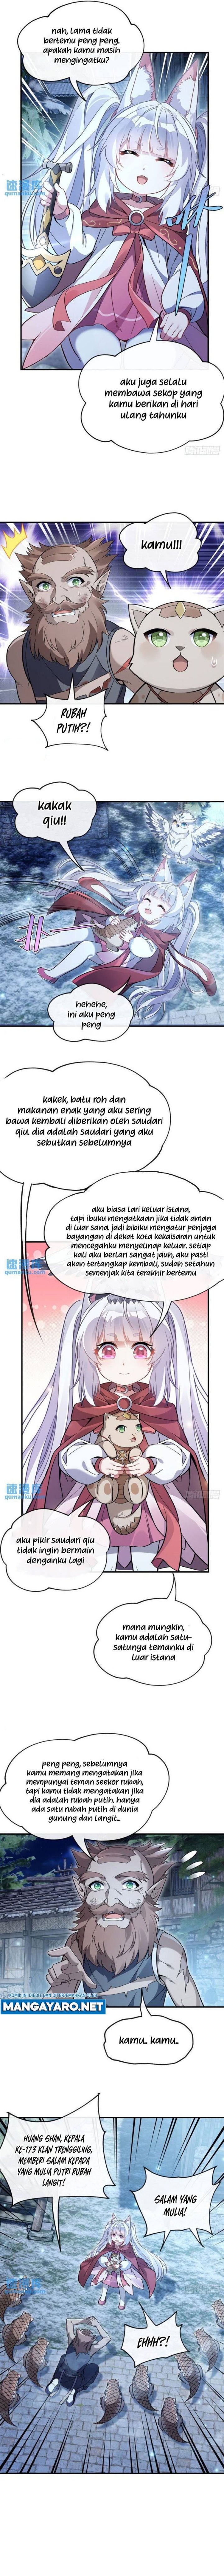 Dilarang COPAS - situs resmi www.mangacanblog.com - Komik my female apprentices are all big shots from the future 193 - chapter 193 194 Indonesia my female apprentices are all big shots from the future 193 - chapter 193 Terbaru 6|Baca Manga Komik Indonesia|Mangacan